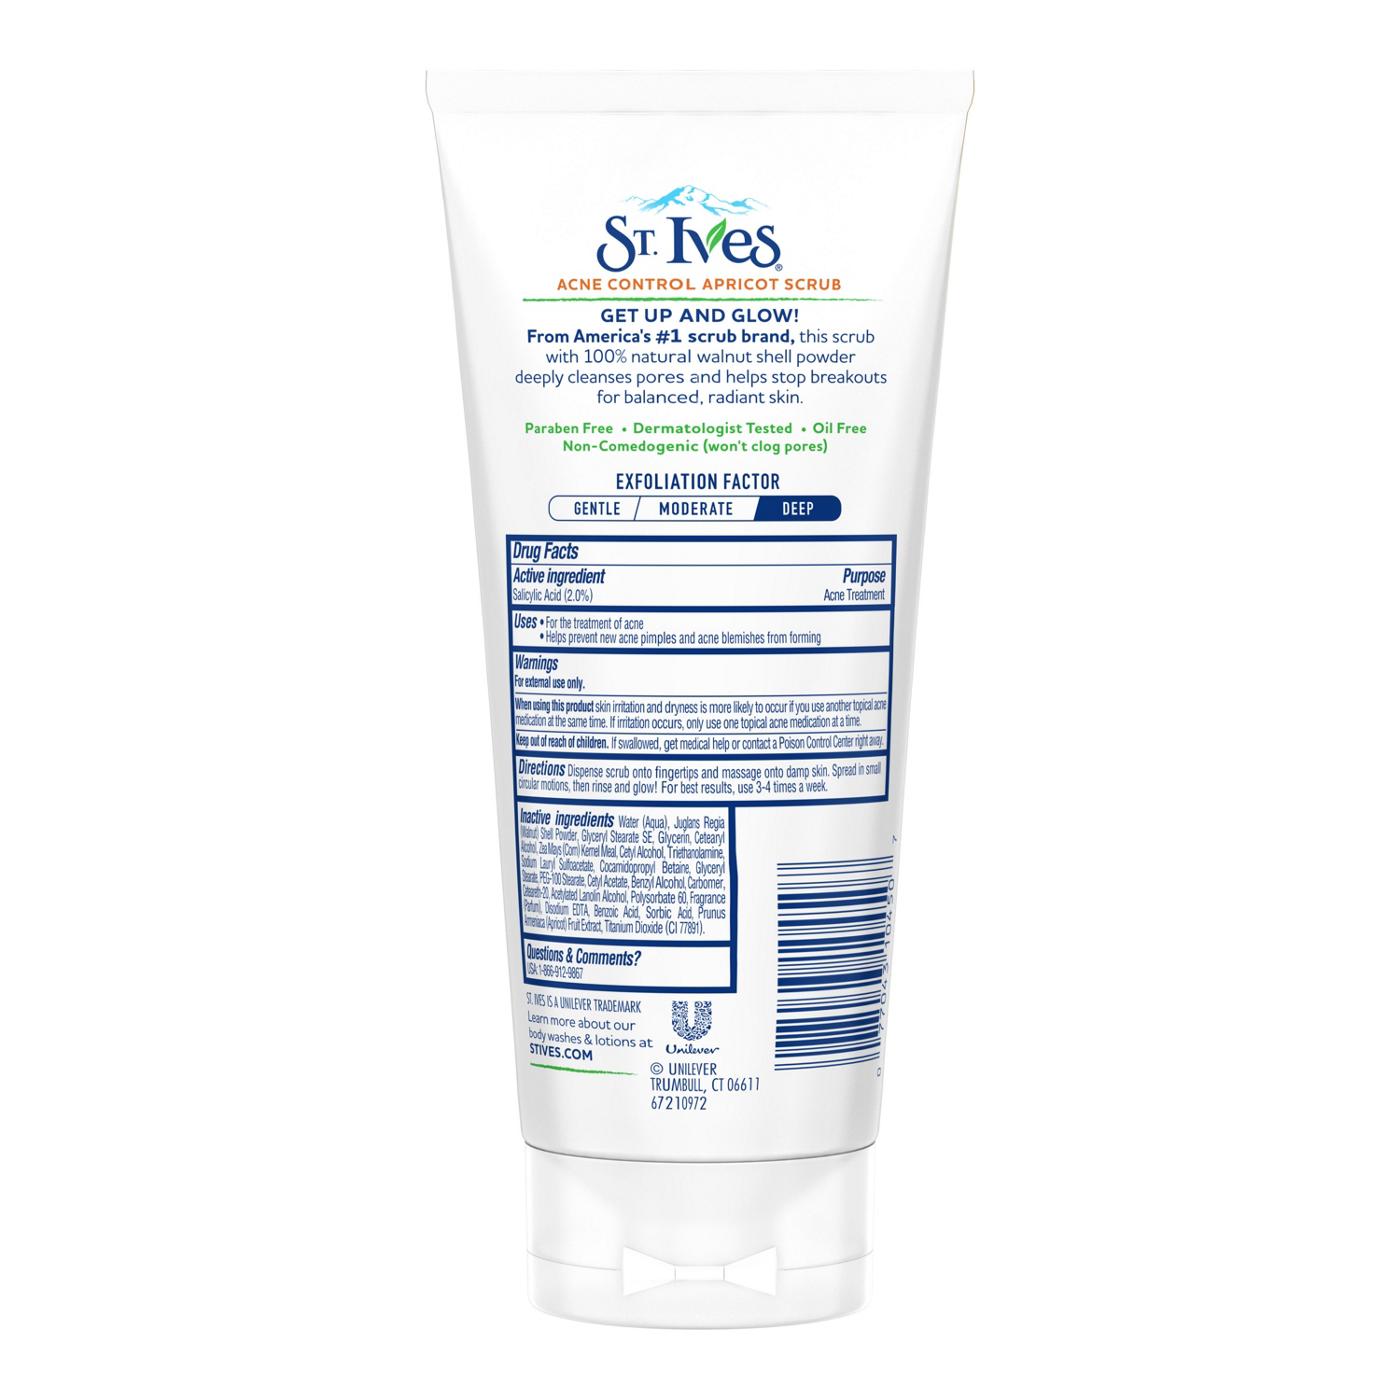 St. Ives Acne Control Face Scrub Apricot; image 3 of 3